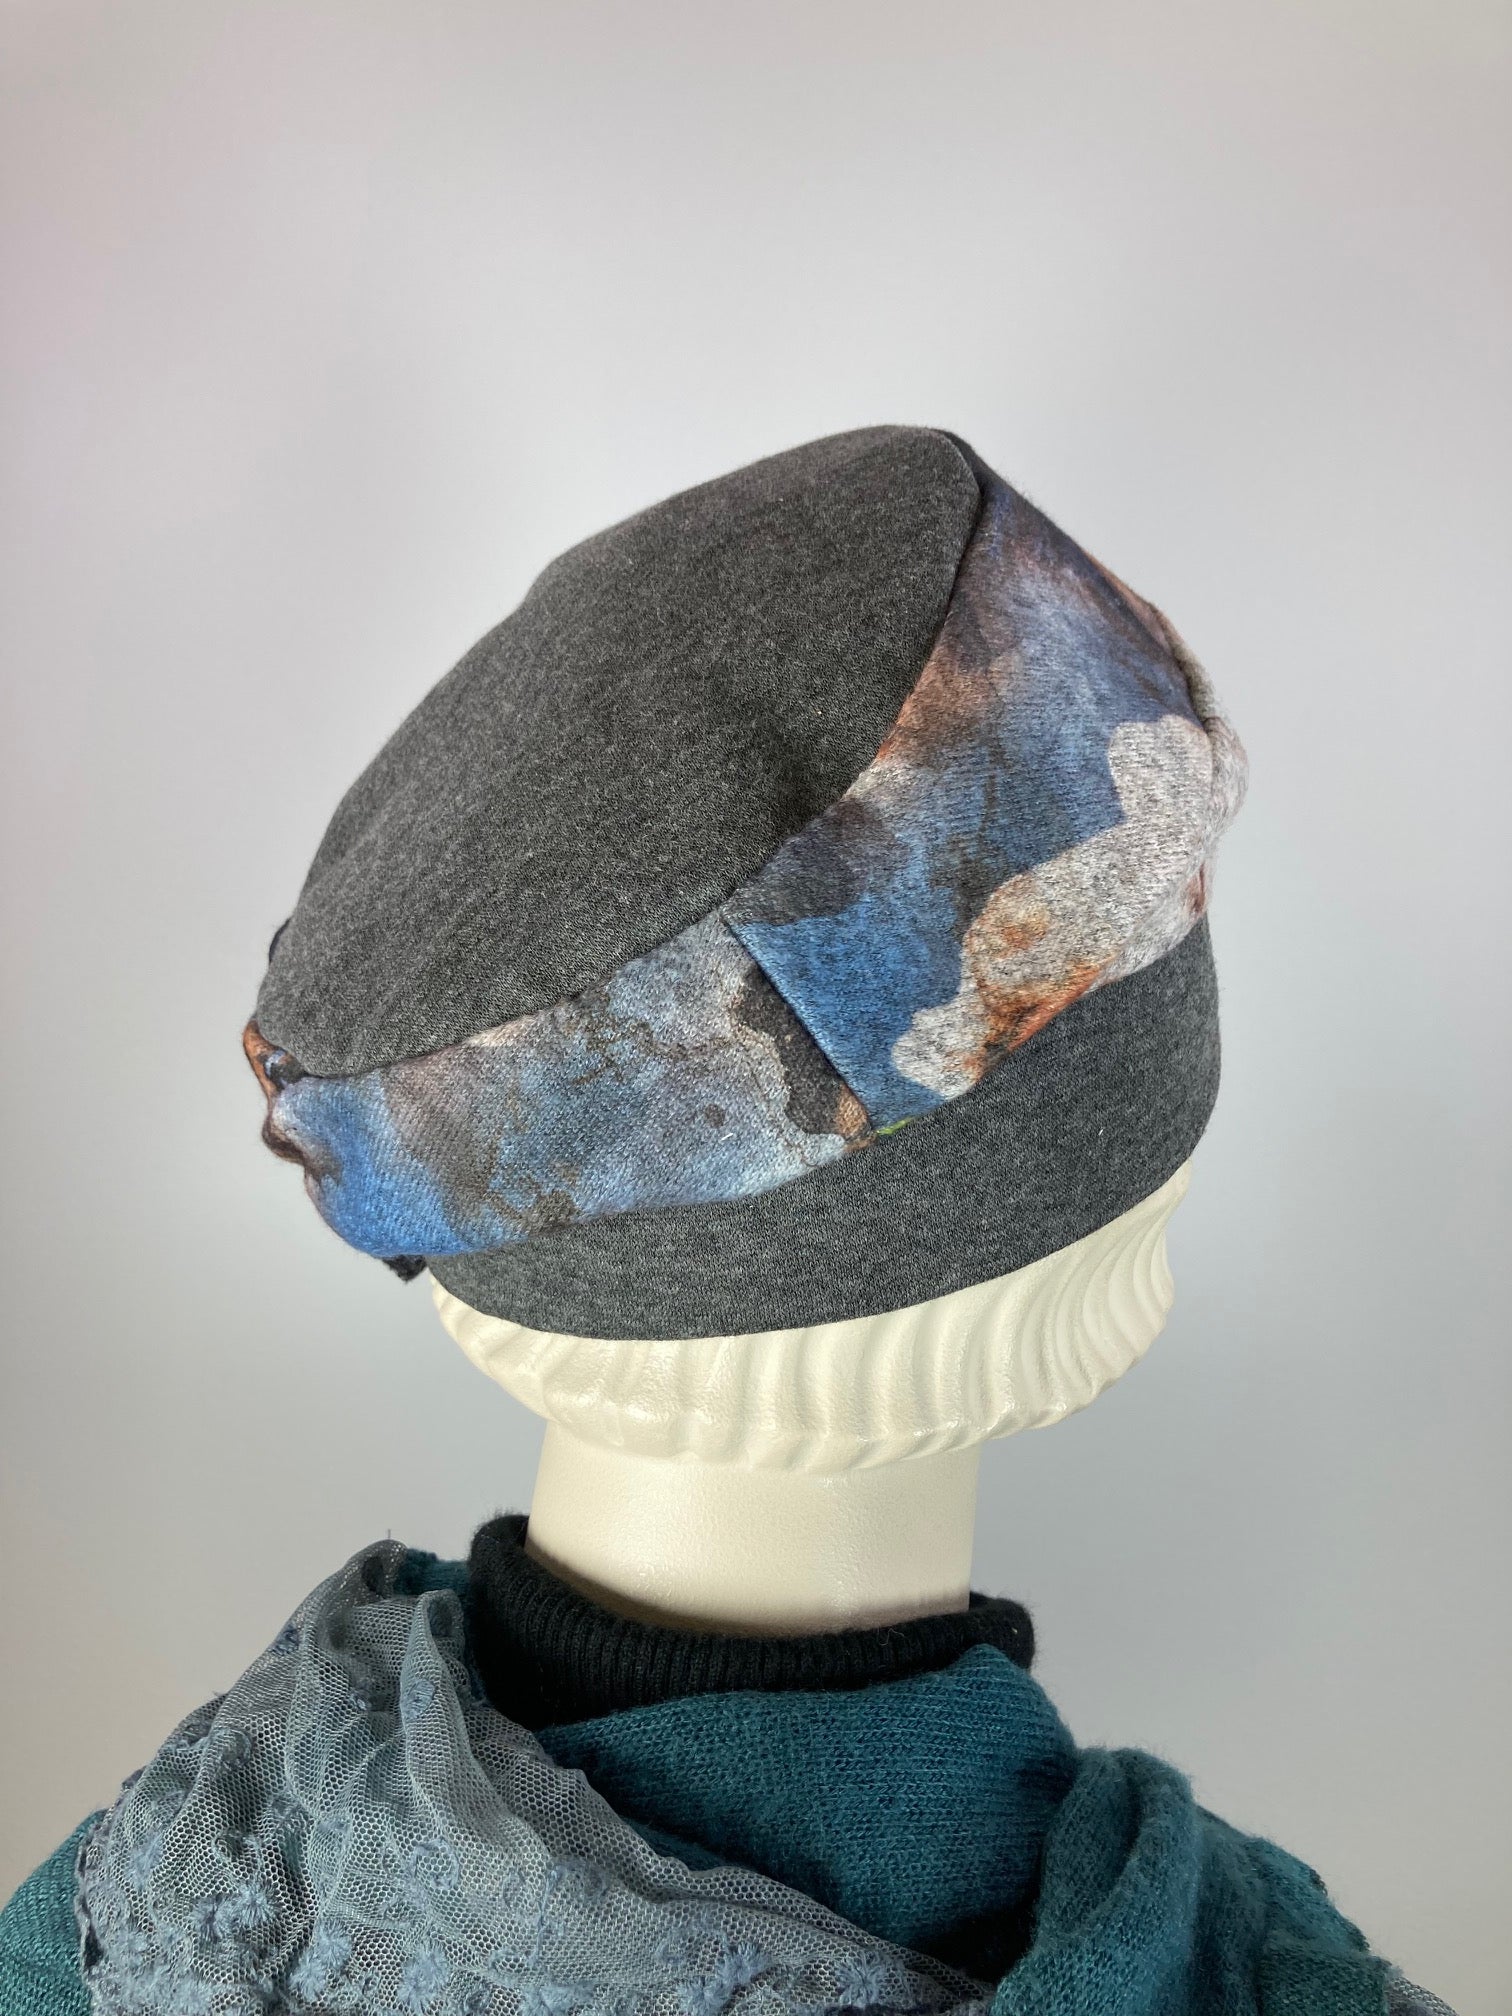 Womens Slouchy Beret. Knit gray rust blue Hat. Slouch Eco friendly Hat. Boho chic hat. Ladies comfy travel hat. Stylish soft fabric hat.